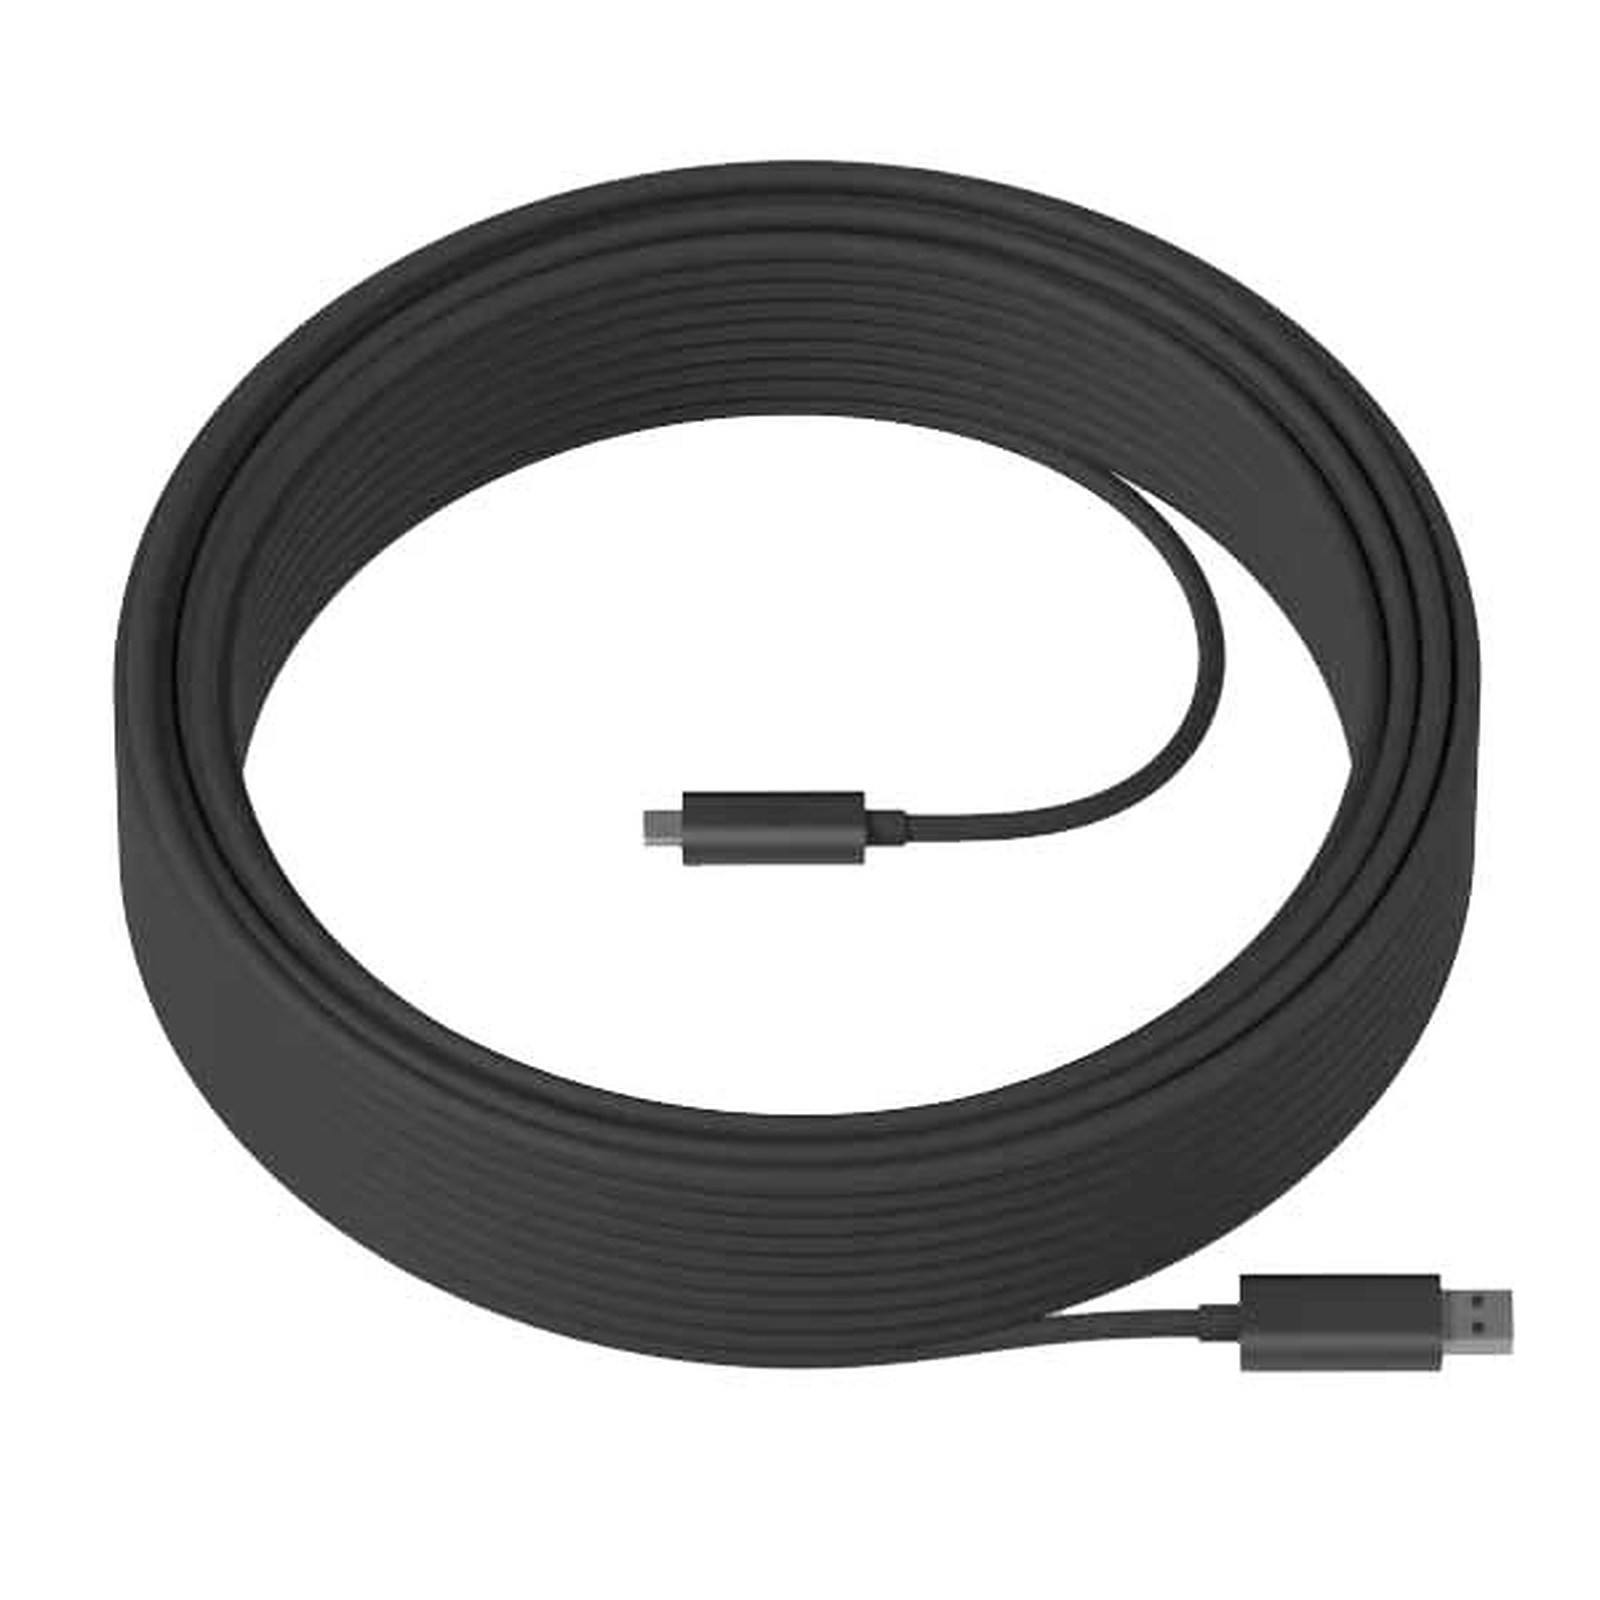 Logitech Strong Cable SuperSpeed extra long USB-A vers USB-C - 10 m - Cable & Adaptateur Logitech